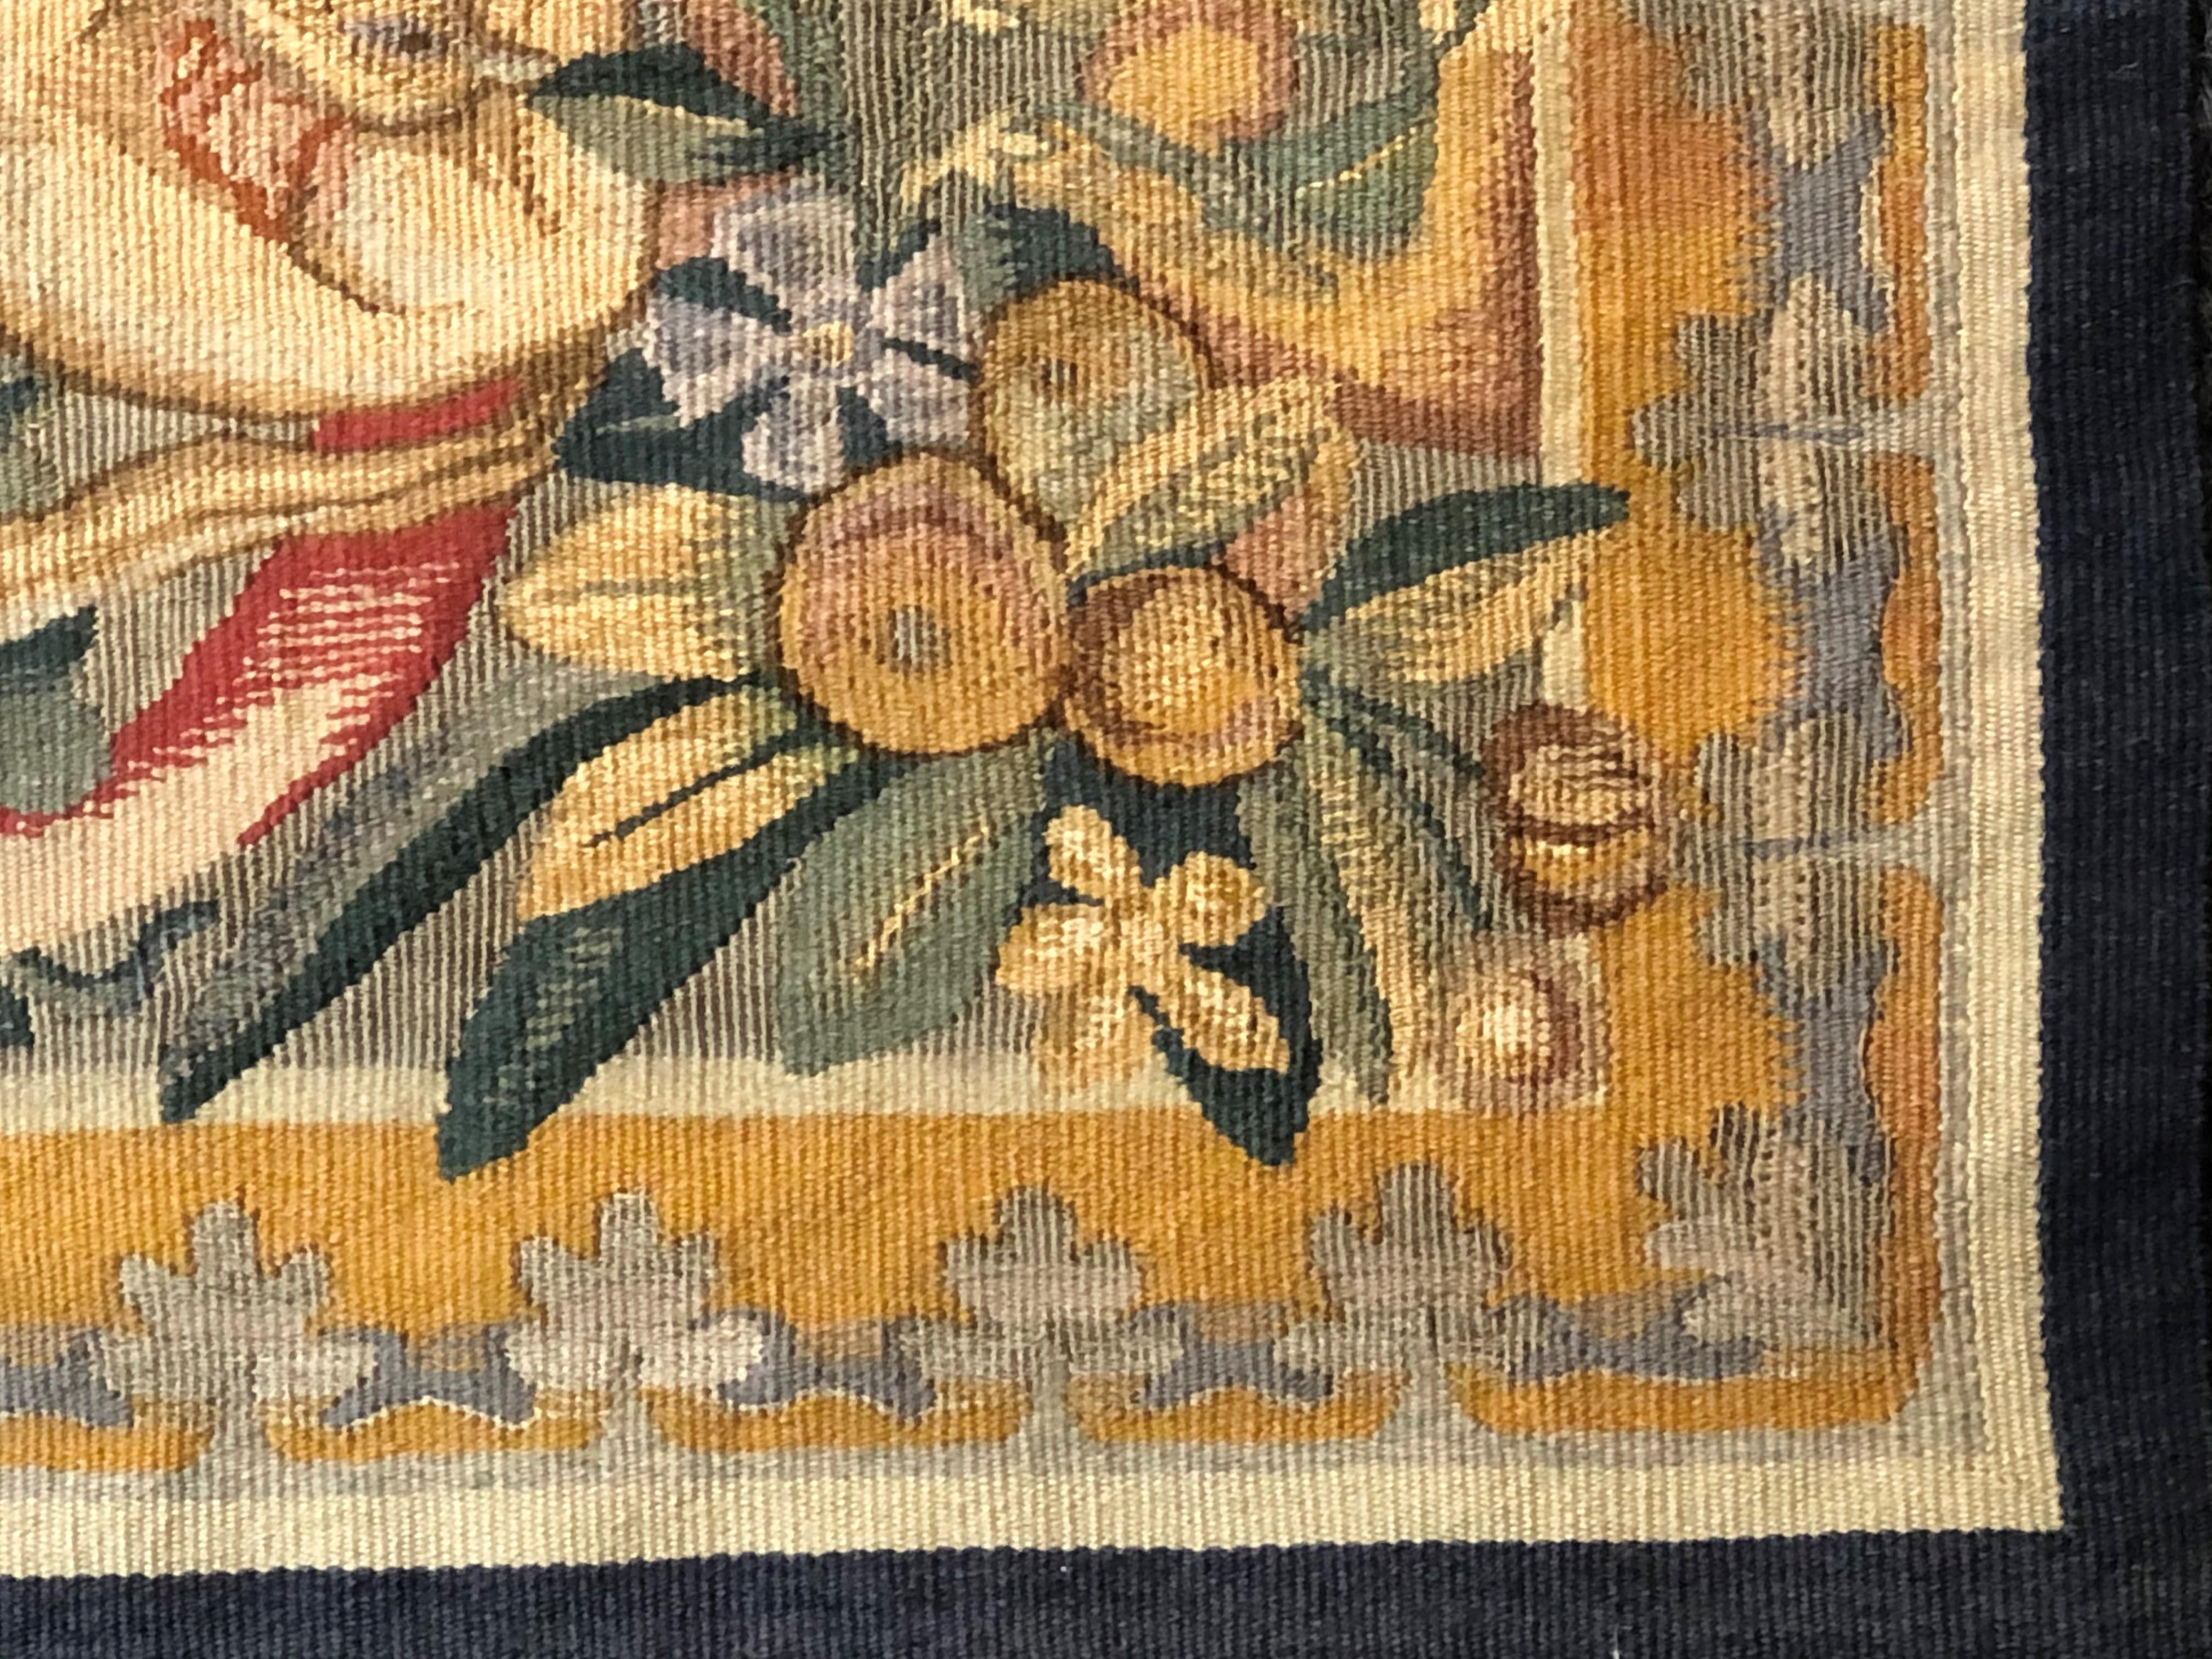 Small but precious this tapestry that comes from the French town of Aubusson. A decoration rich in flowers and fruits revolves around a fight scene between a feline and a bird of prey with a large plumage. The bloody scene contrasts with the